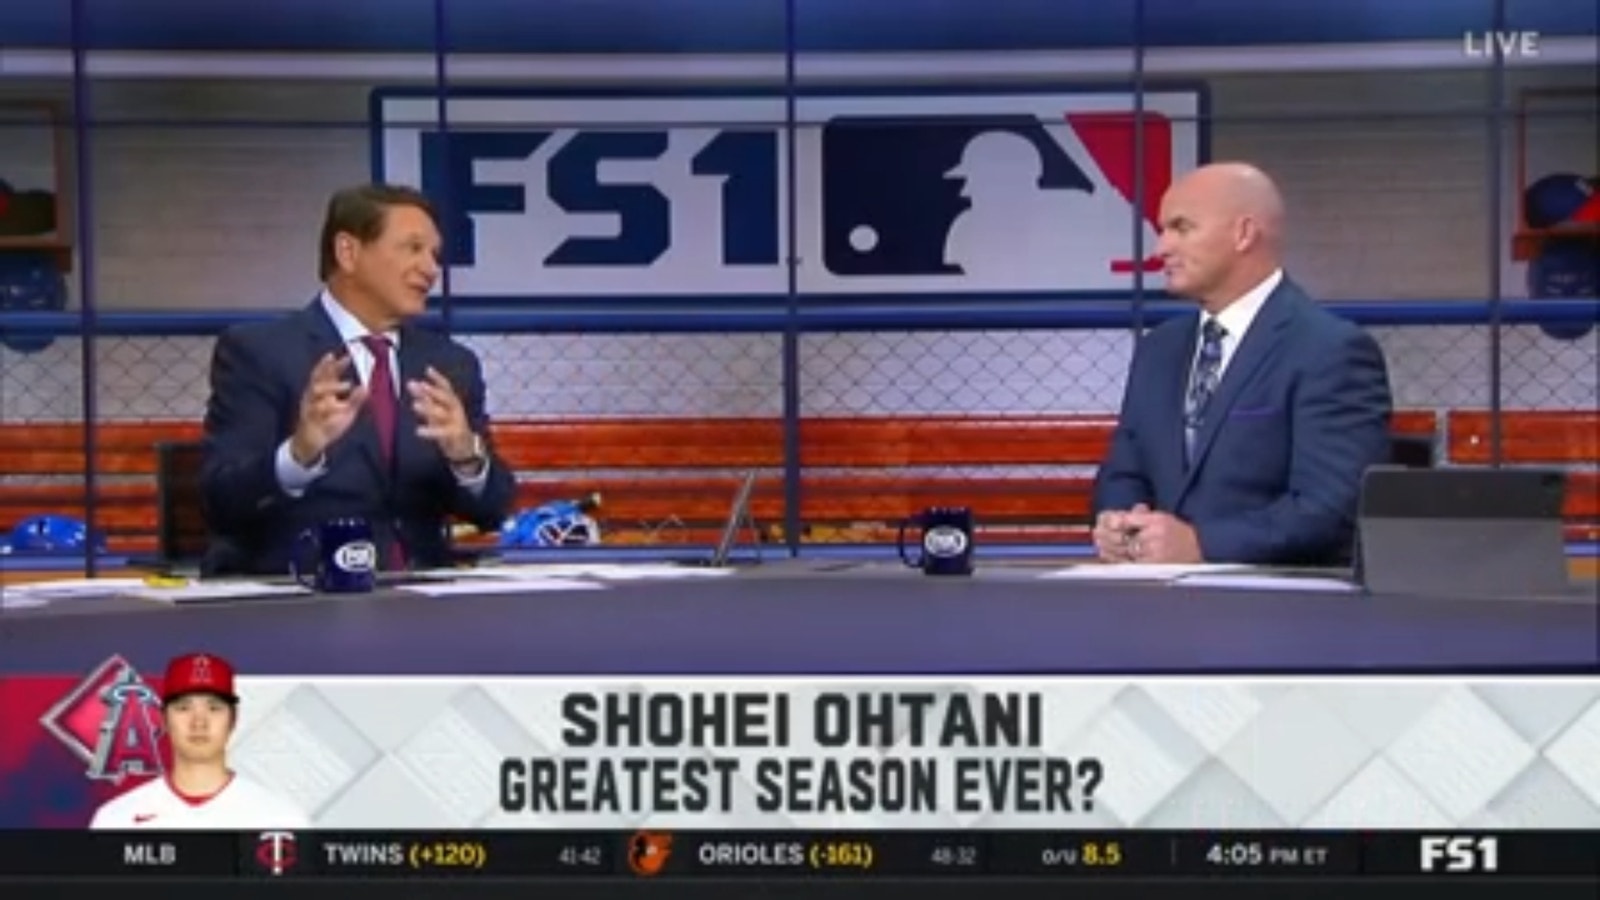 Is Shohei Ohtani in the midst of the greatest season of all time?